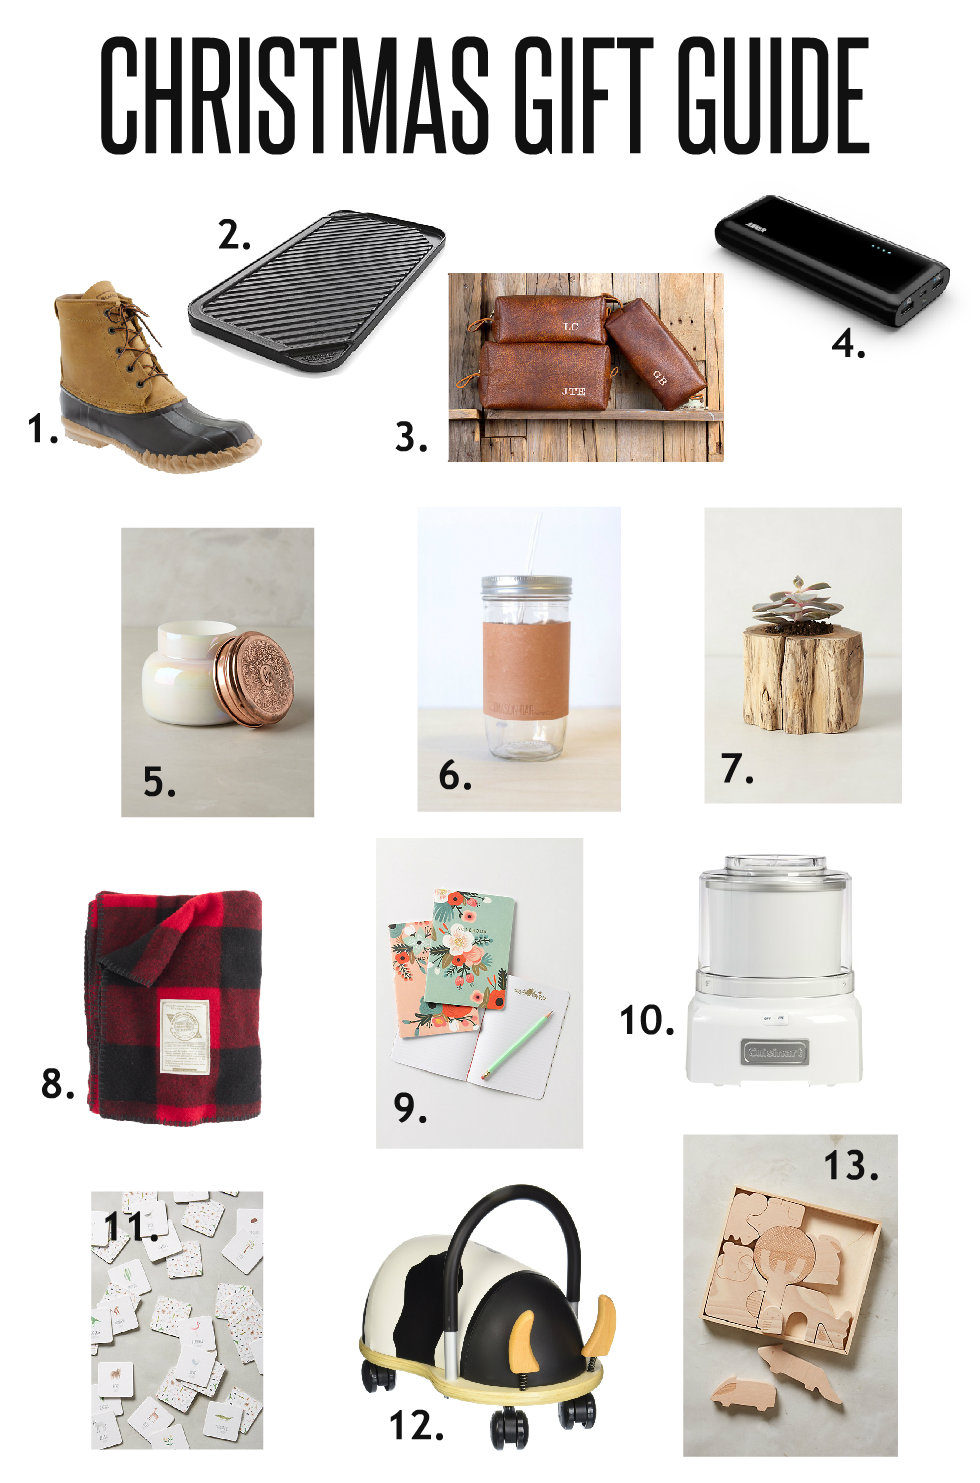 Little + Lovely Blog: Holiday Gift Guide - tips and ways to save